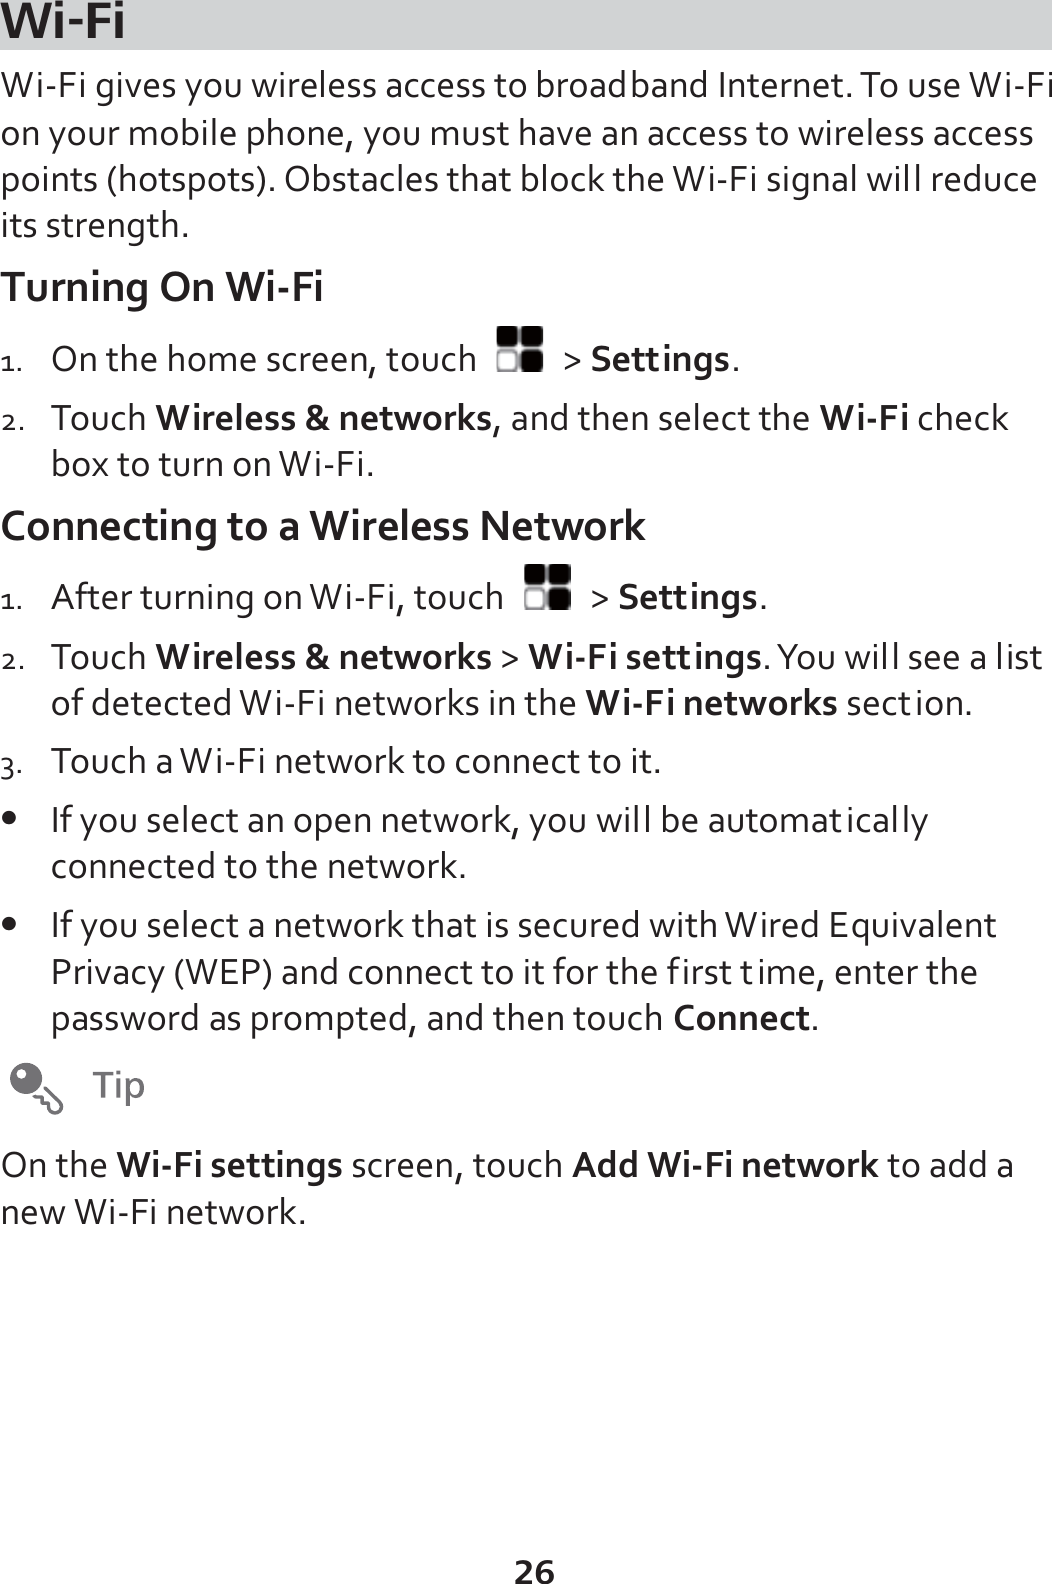 26 Wi-Fi Wi-Fi gives you wireless access to broadband Internet. To use Wi-Fi on your mobile phone, you must have an access to wireless access points (hotspots). Obstacles that block the Wi-Fi signal will reduce its strength. Turning On Wi-Fi 1. On the home screen, touch   &gt; Settings. 2. Touch Wireless &amp; networks, and then select the Wi-Fi check box to turn on Wi-Fi. Connecting to a Wireless Network 1. After turning on Wi-Fi, touch   &gt; Settings. 2. Touch Wireless &amp; networks &gt; Wi-Fi settings. You will see a list of detected Wi-Fi networks in the Wi-Fi networks section. 3. Touch a Wi-Fi network to connect to it. z If you select an open network, you will be automatically connected to the network. z If you select a network that is secured with Wired Equivalent Privacy (WEP) and connect to it for the first time, enter the password as prompted, and then touch Connect.   On the Wi-Fi settings screen, touch Add Wi-Fi network to add a new Wi-Fi network.  